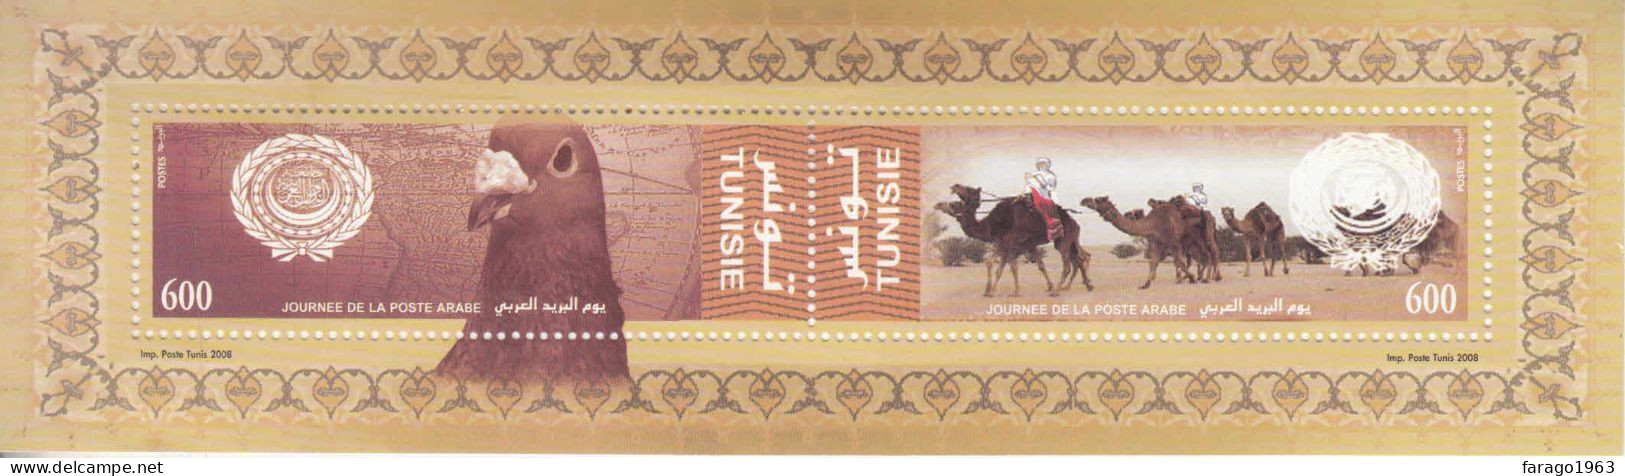 2008 Tunisia Arab Post Day Camels Pigeon JOINT ISSUE Souvenir Sheet MNH - Tunesien (1956-...)